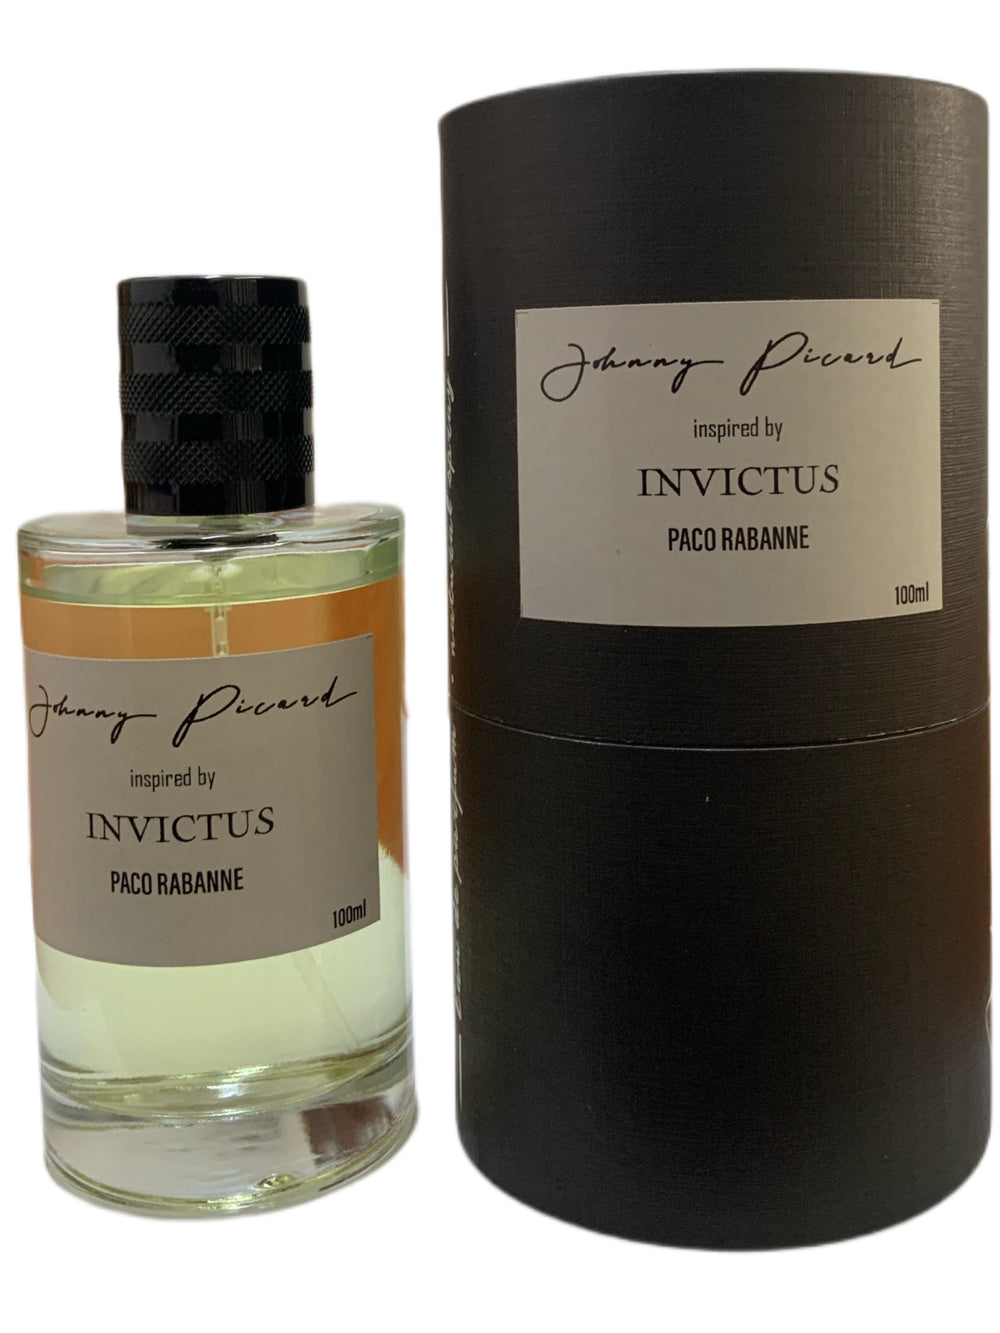 johnny picard inspired by invictus  PACO RABANNE